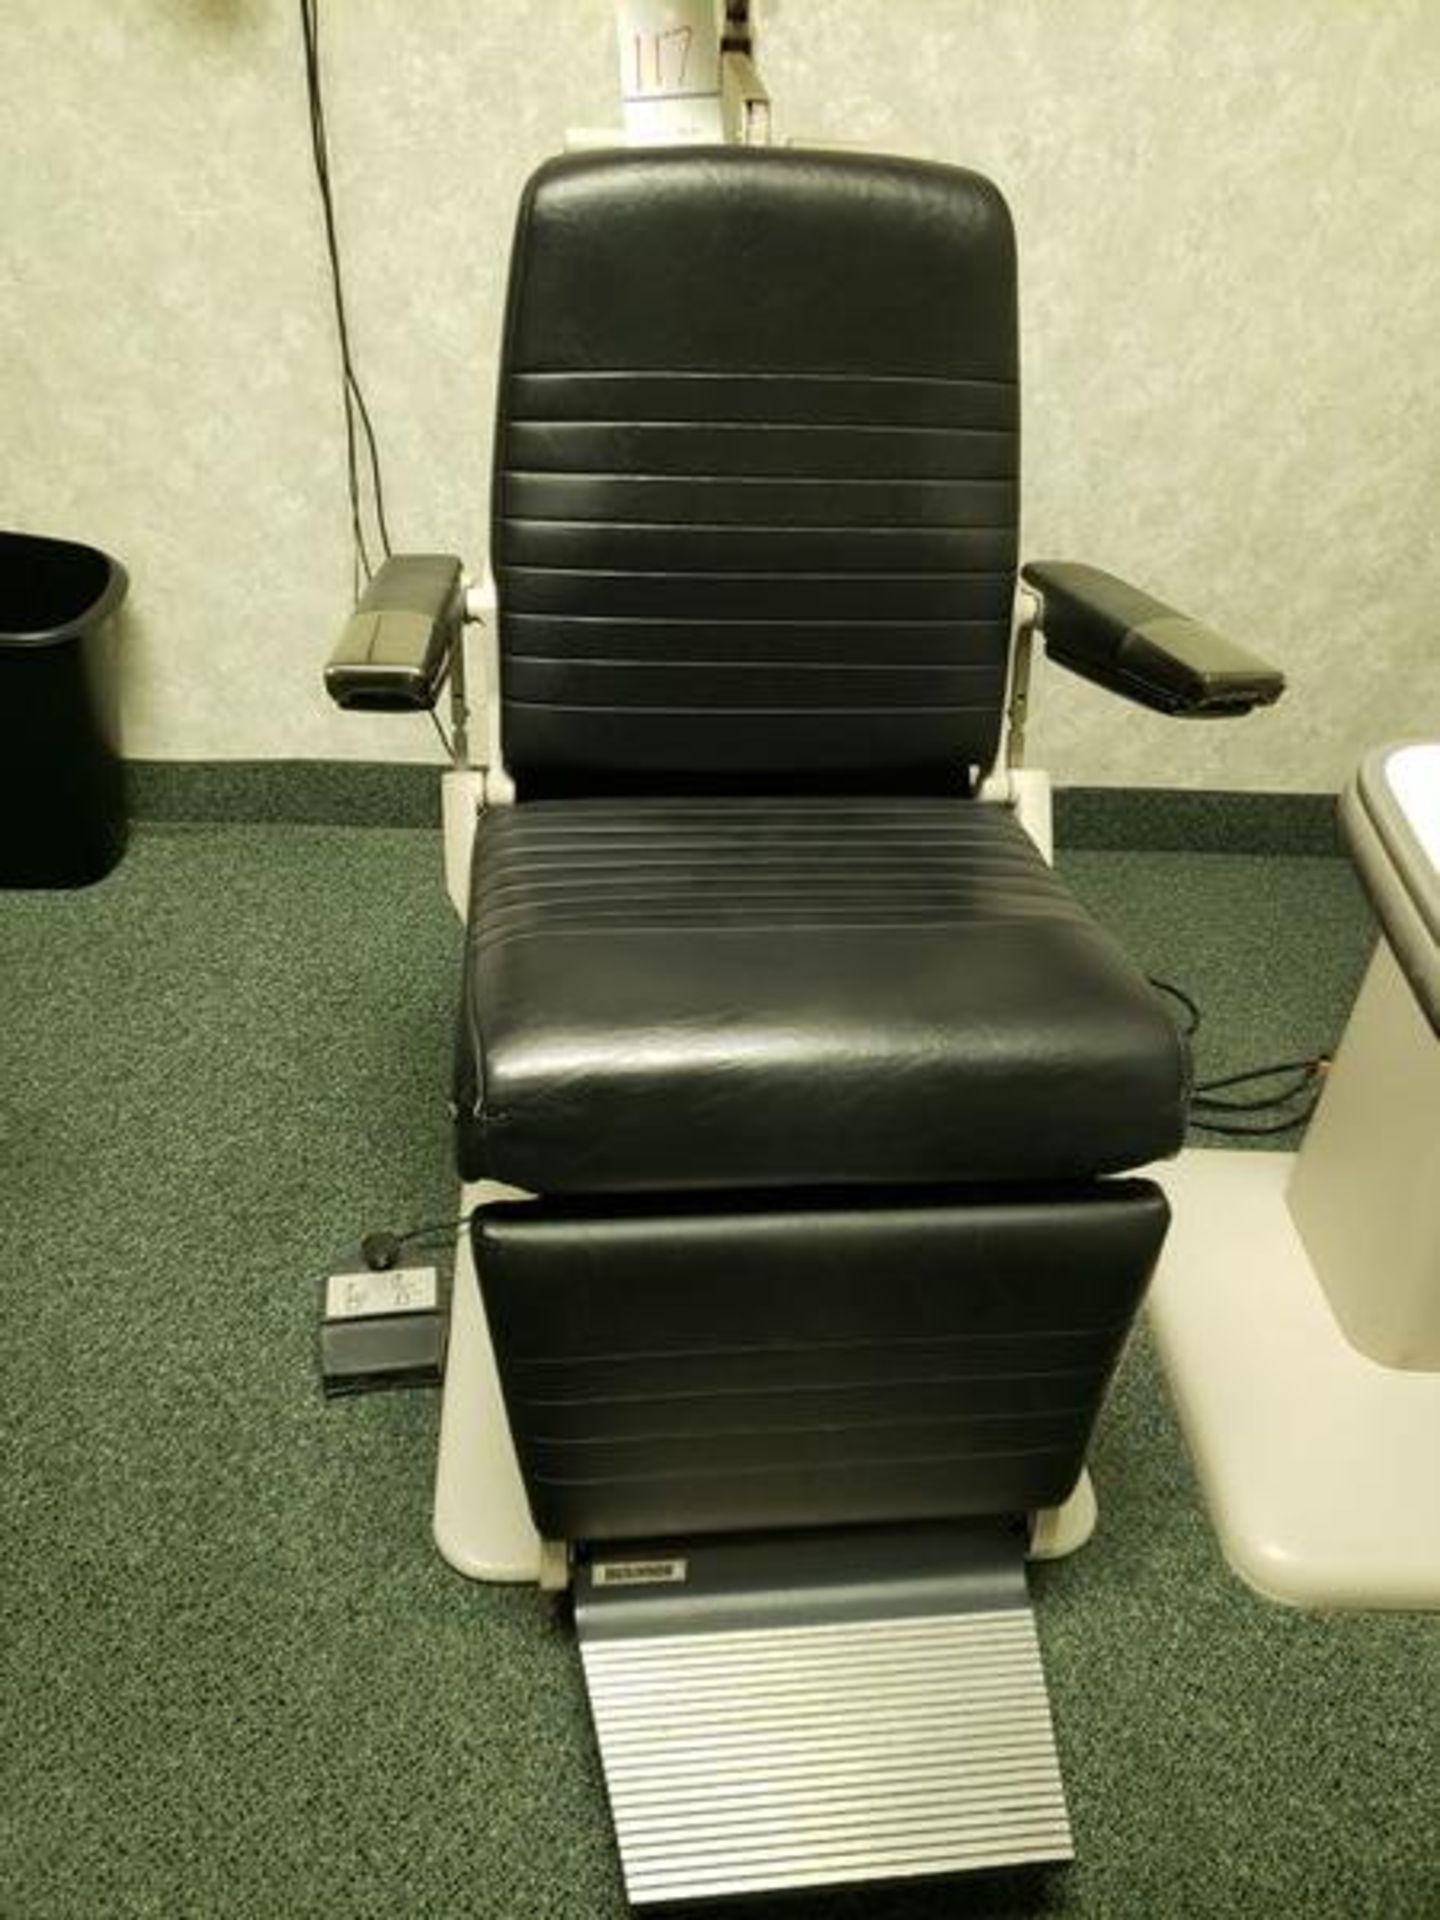 RELIANCE OPTICAL CHAIR MODEL 6200L - Image 4 of 5